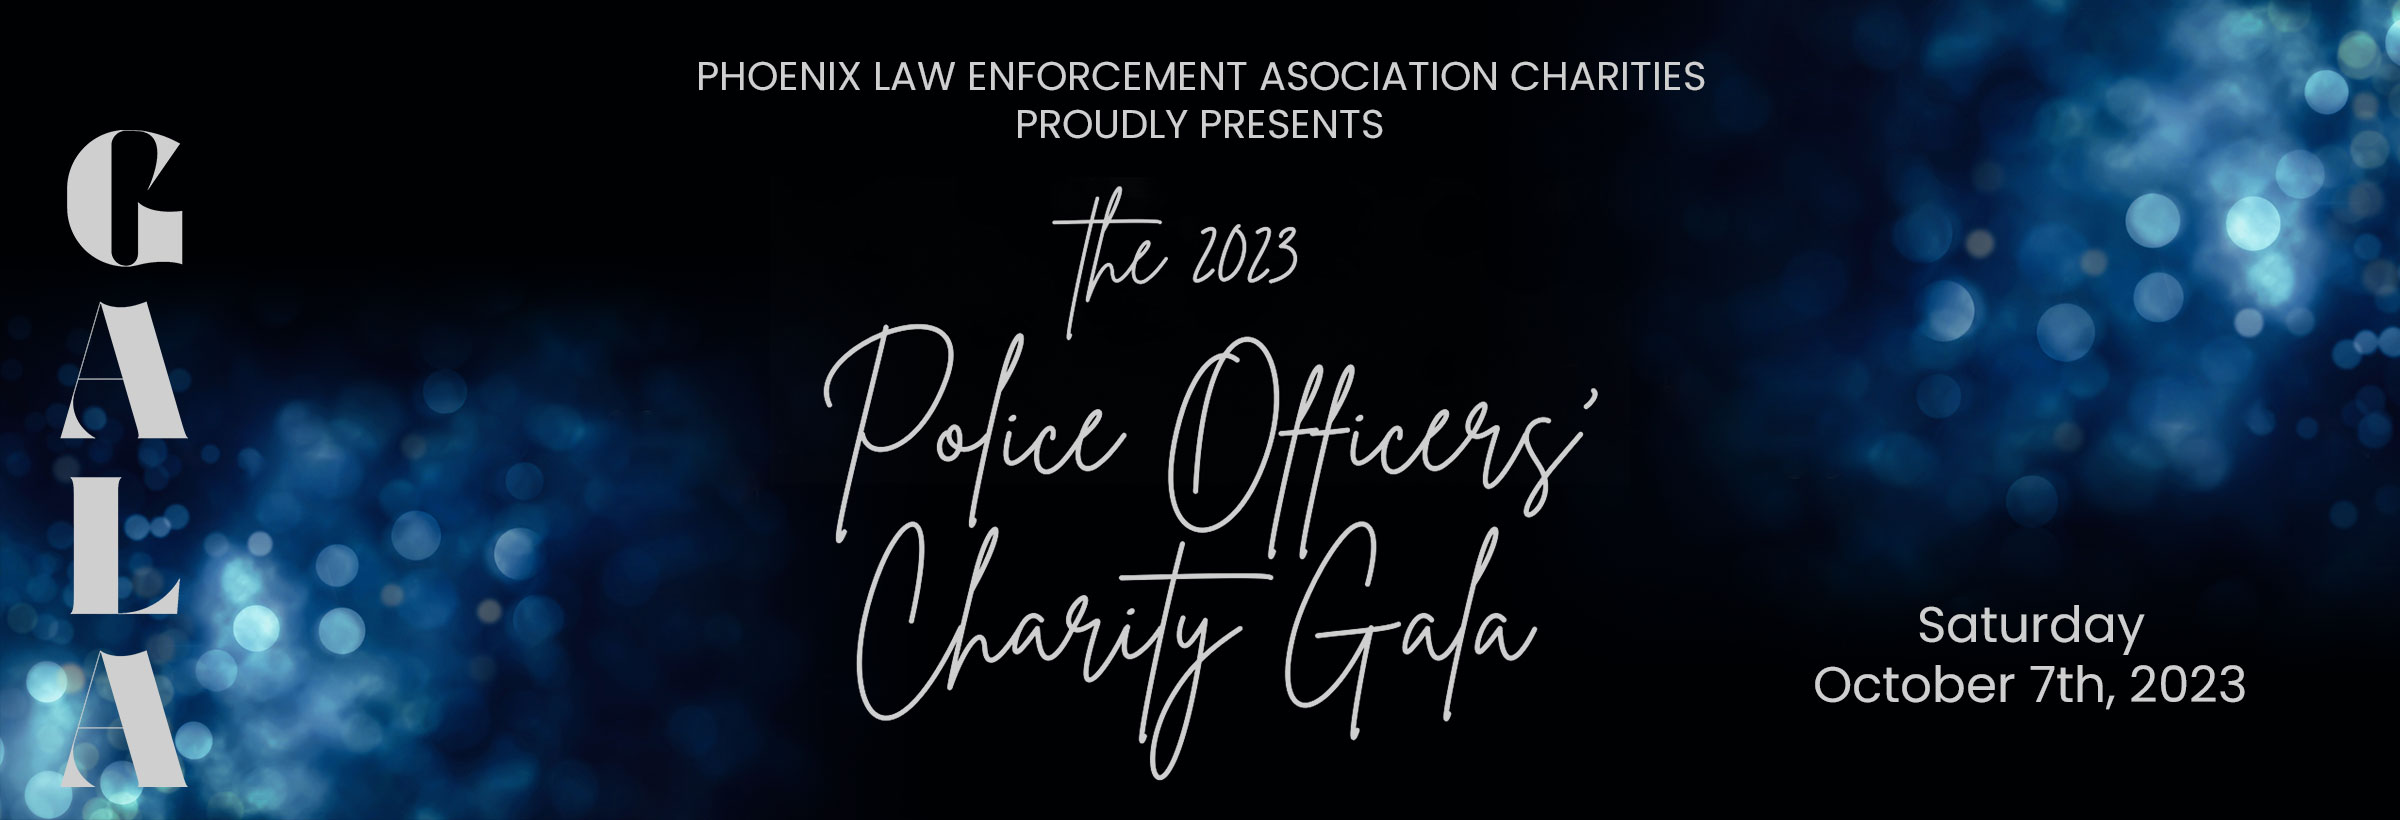 Police Officers’ Charity Gala